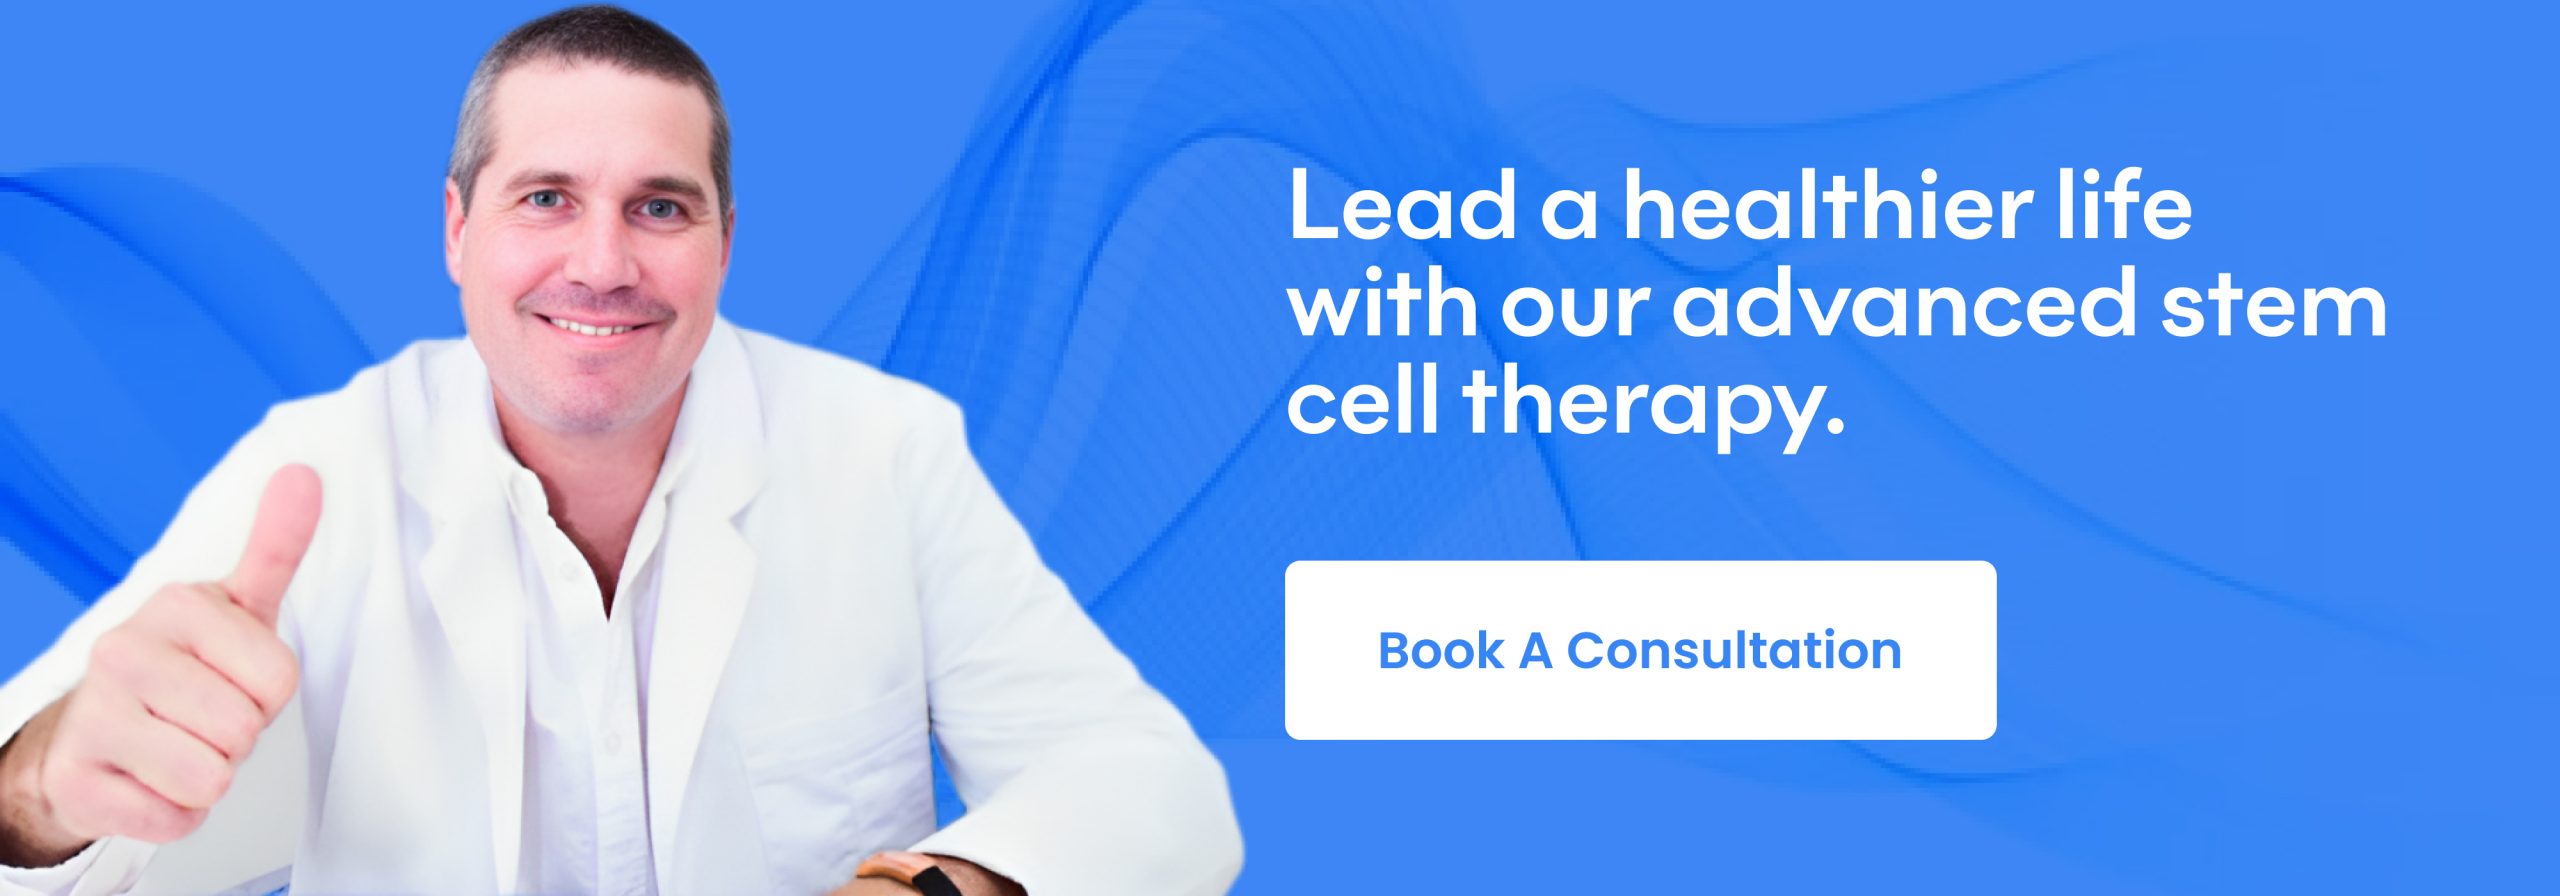 Lead a healthier life with our advanced stem cell therapy.